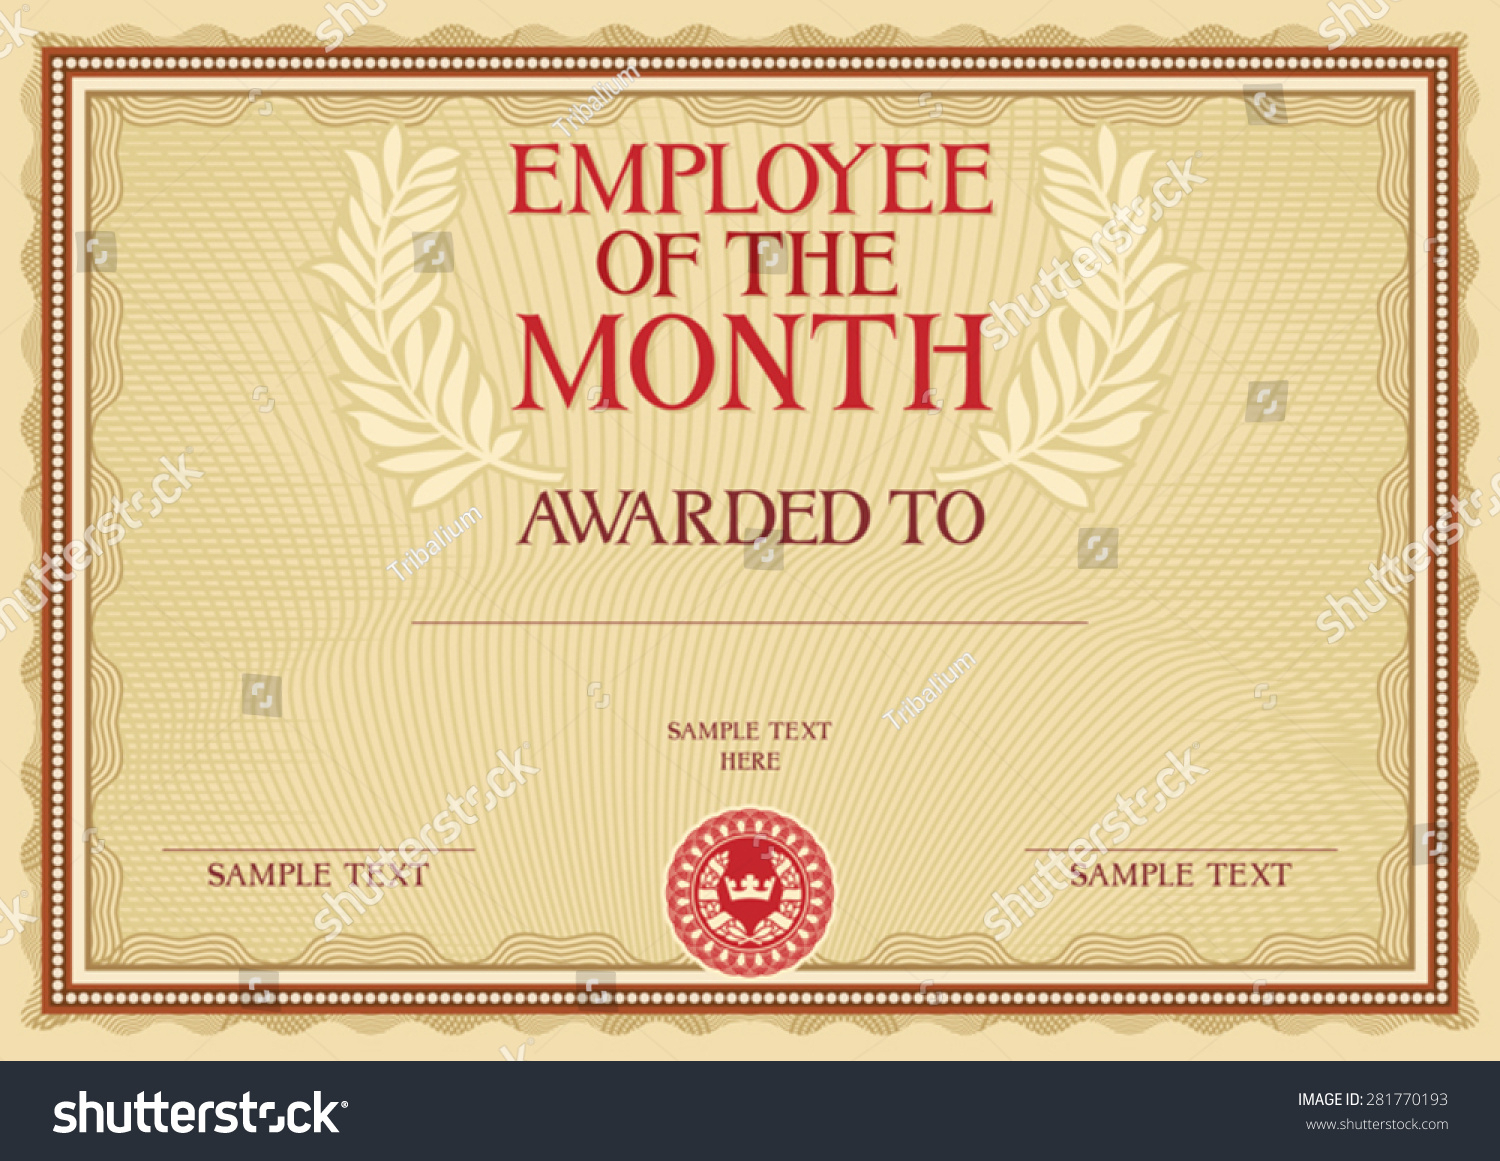 Manager Of The Month Certificate Template - Yeder.berglauf-Verband regarding Manager Of The Month Certificate Template